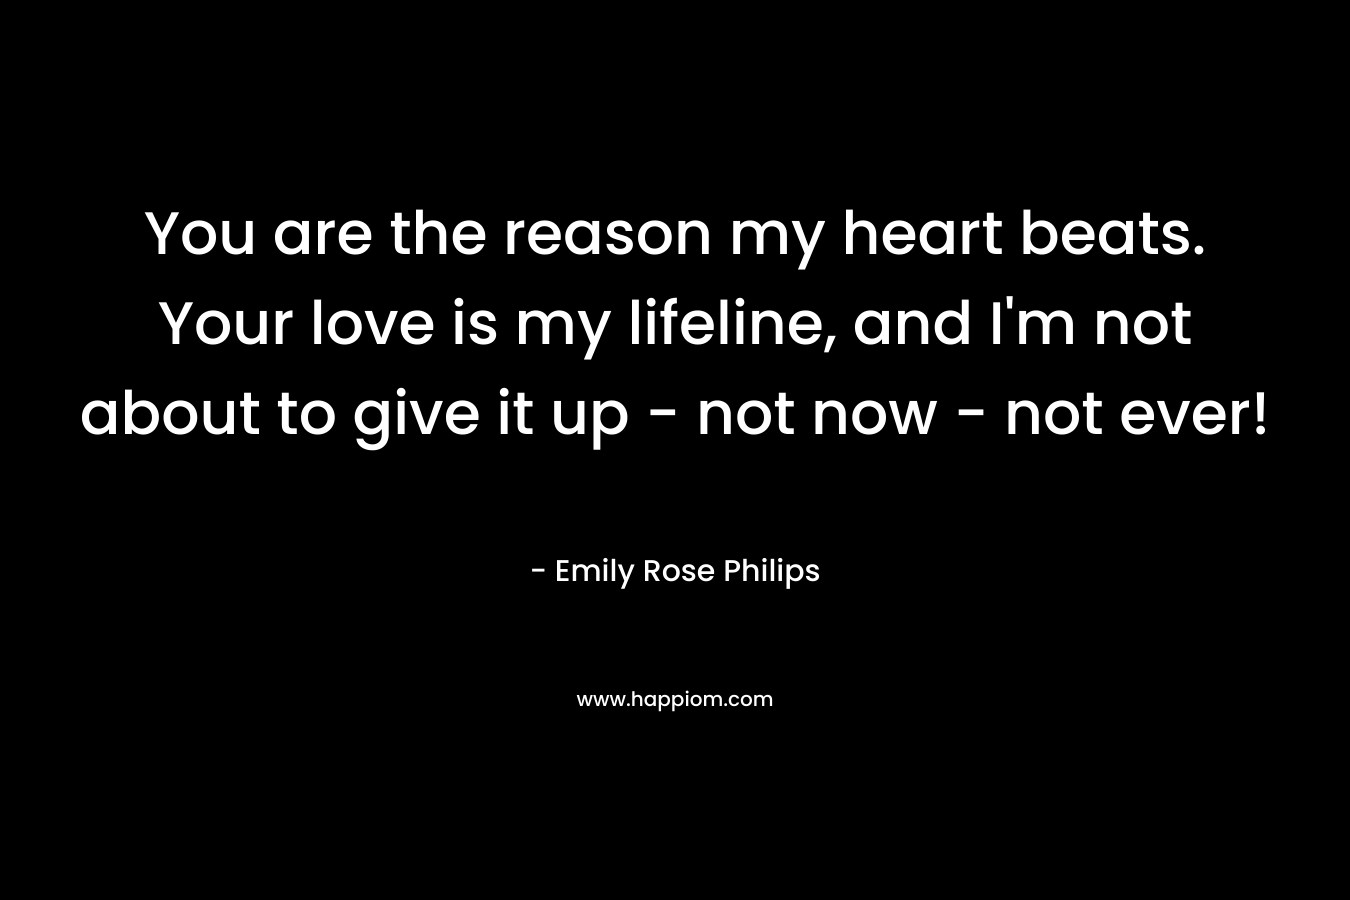 You are the reason my heart beats. Your love is my lifeline, and I’m not about to give it up – not now – not ever! – Emily Rose Philips